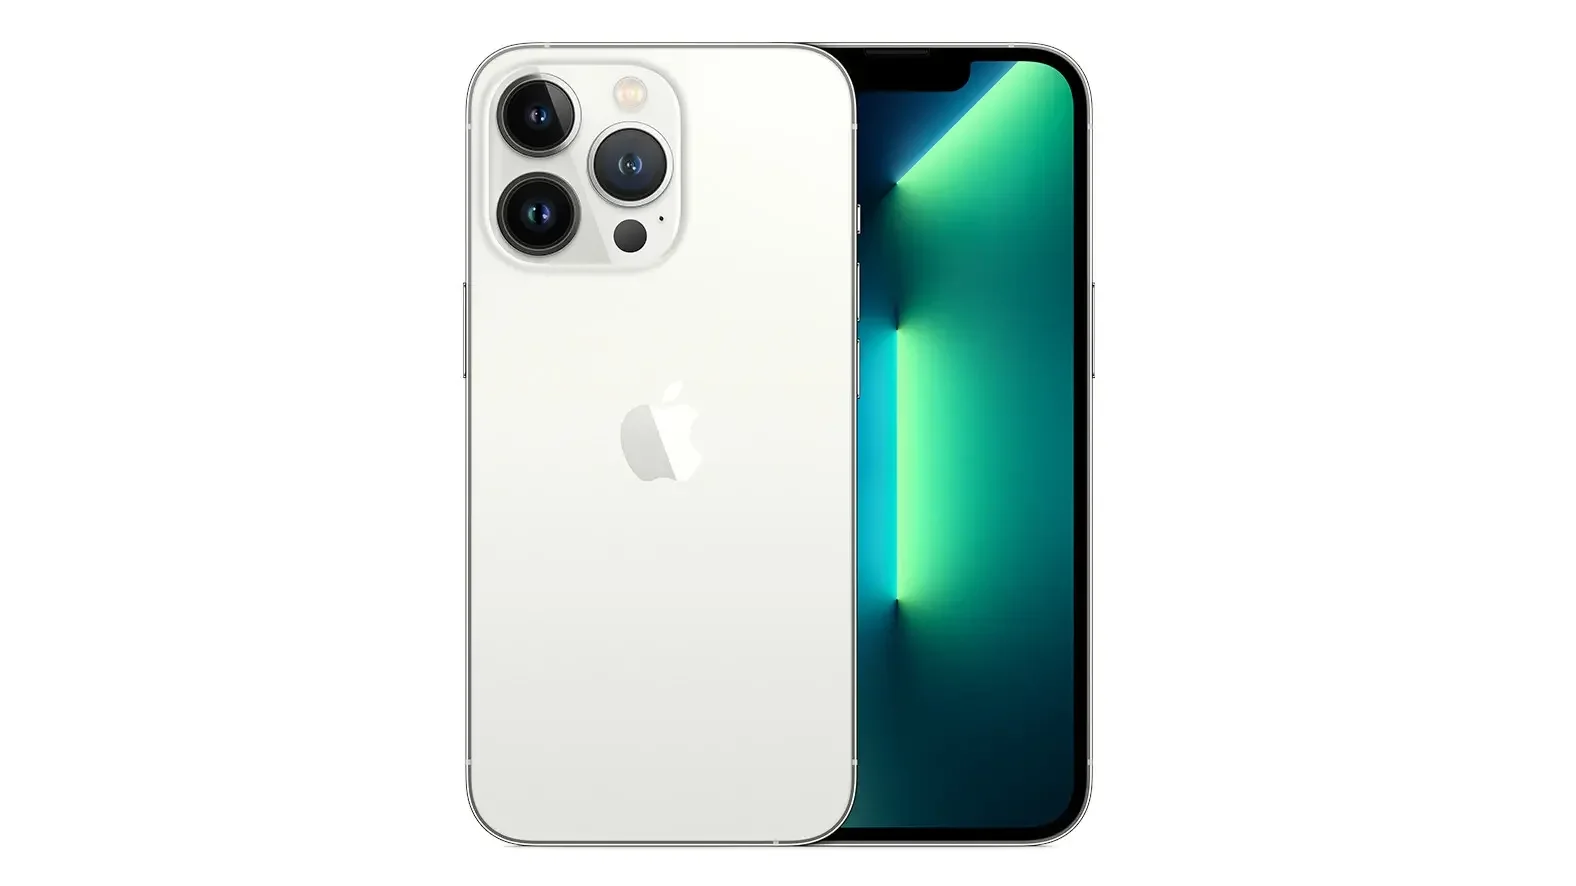 The iPhone 13 Pro showcasing the Silver color option - iPhone 14 colors expectations: what we've heard so far